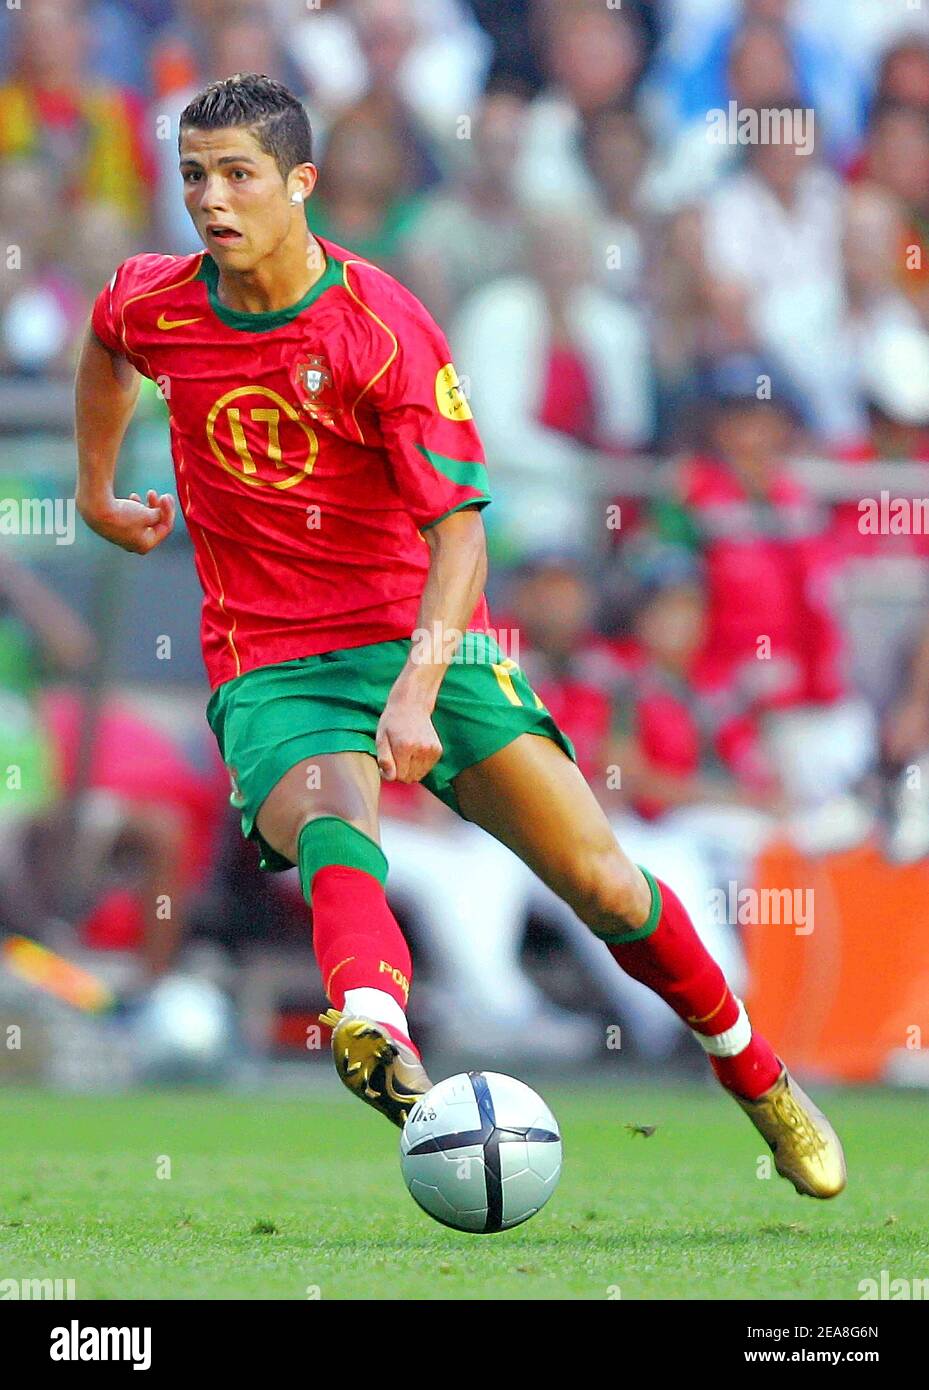 Portugal's Cristiano Ronaldo in action during the European championships in  Lisbone, Portugal, on June 26, 2004. Photo by Christian  Liewig/ABACAPRESS.COM Stock Photo - Alamy